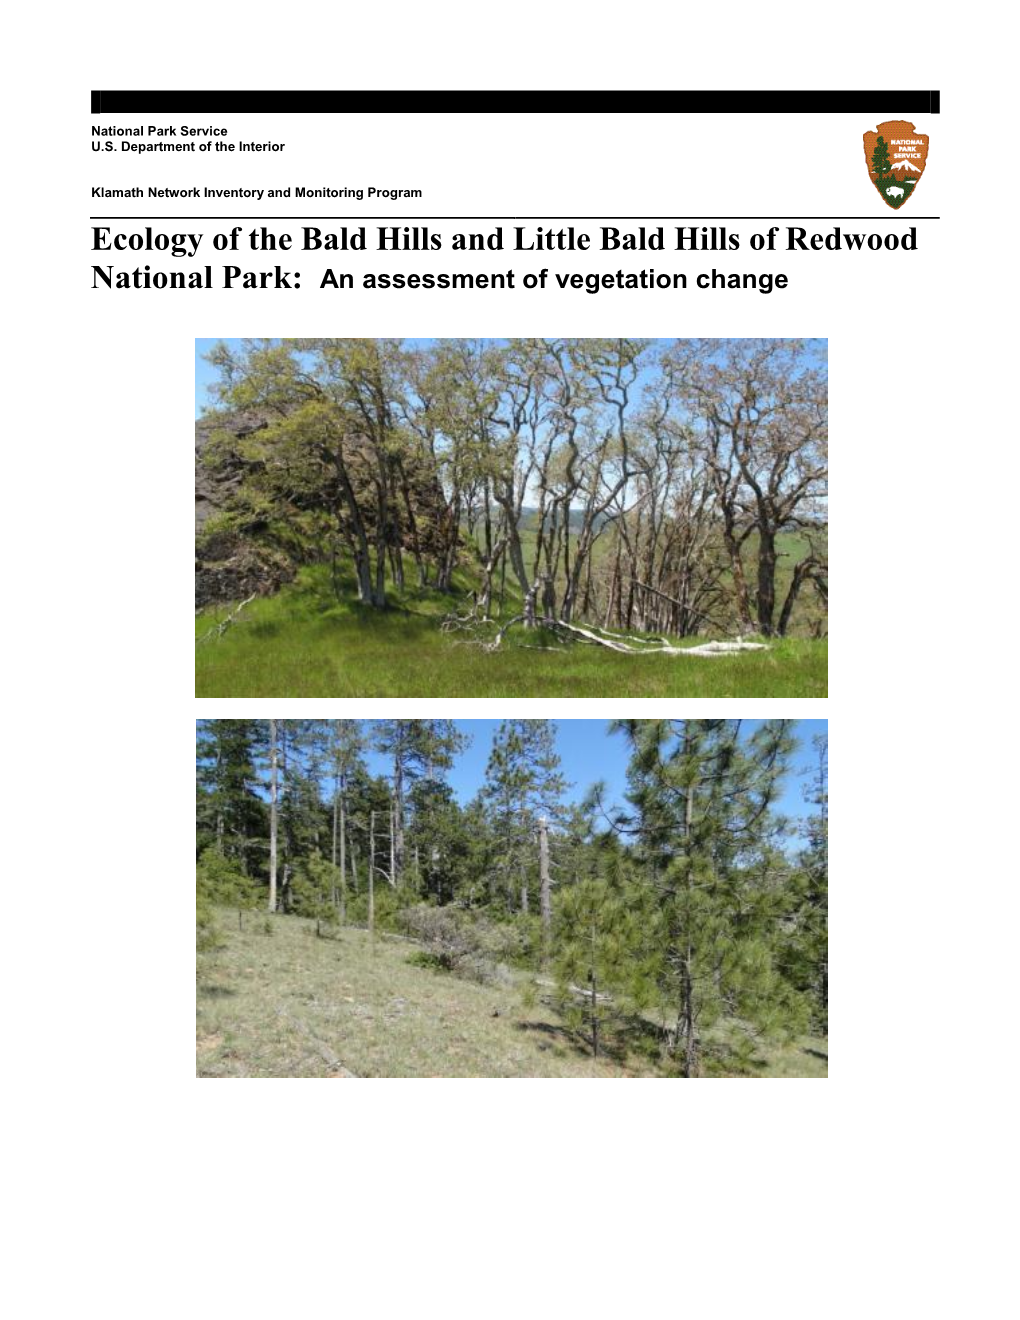 Fir Forests in the Little Bald Hills?